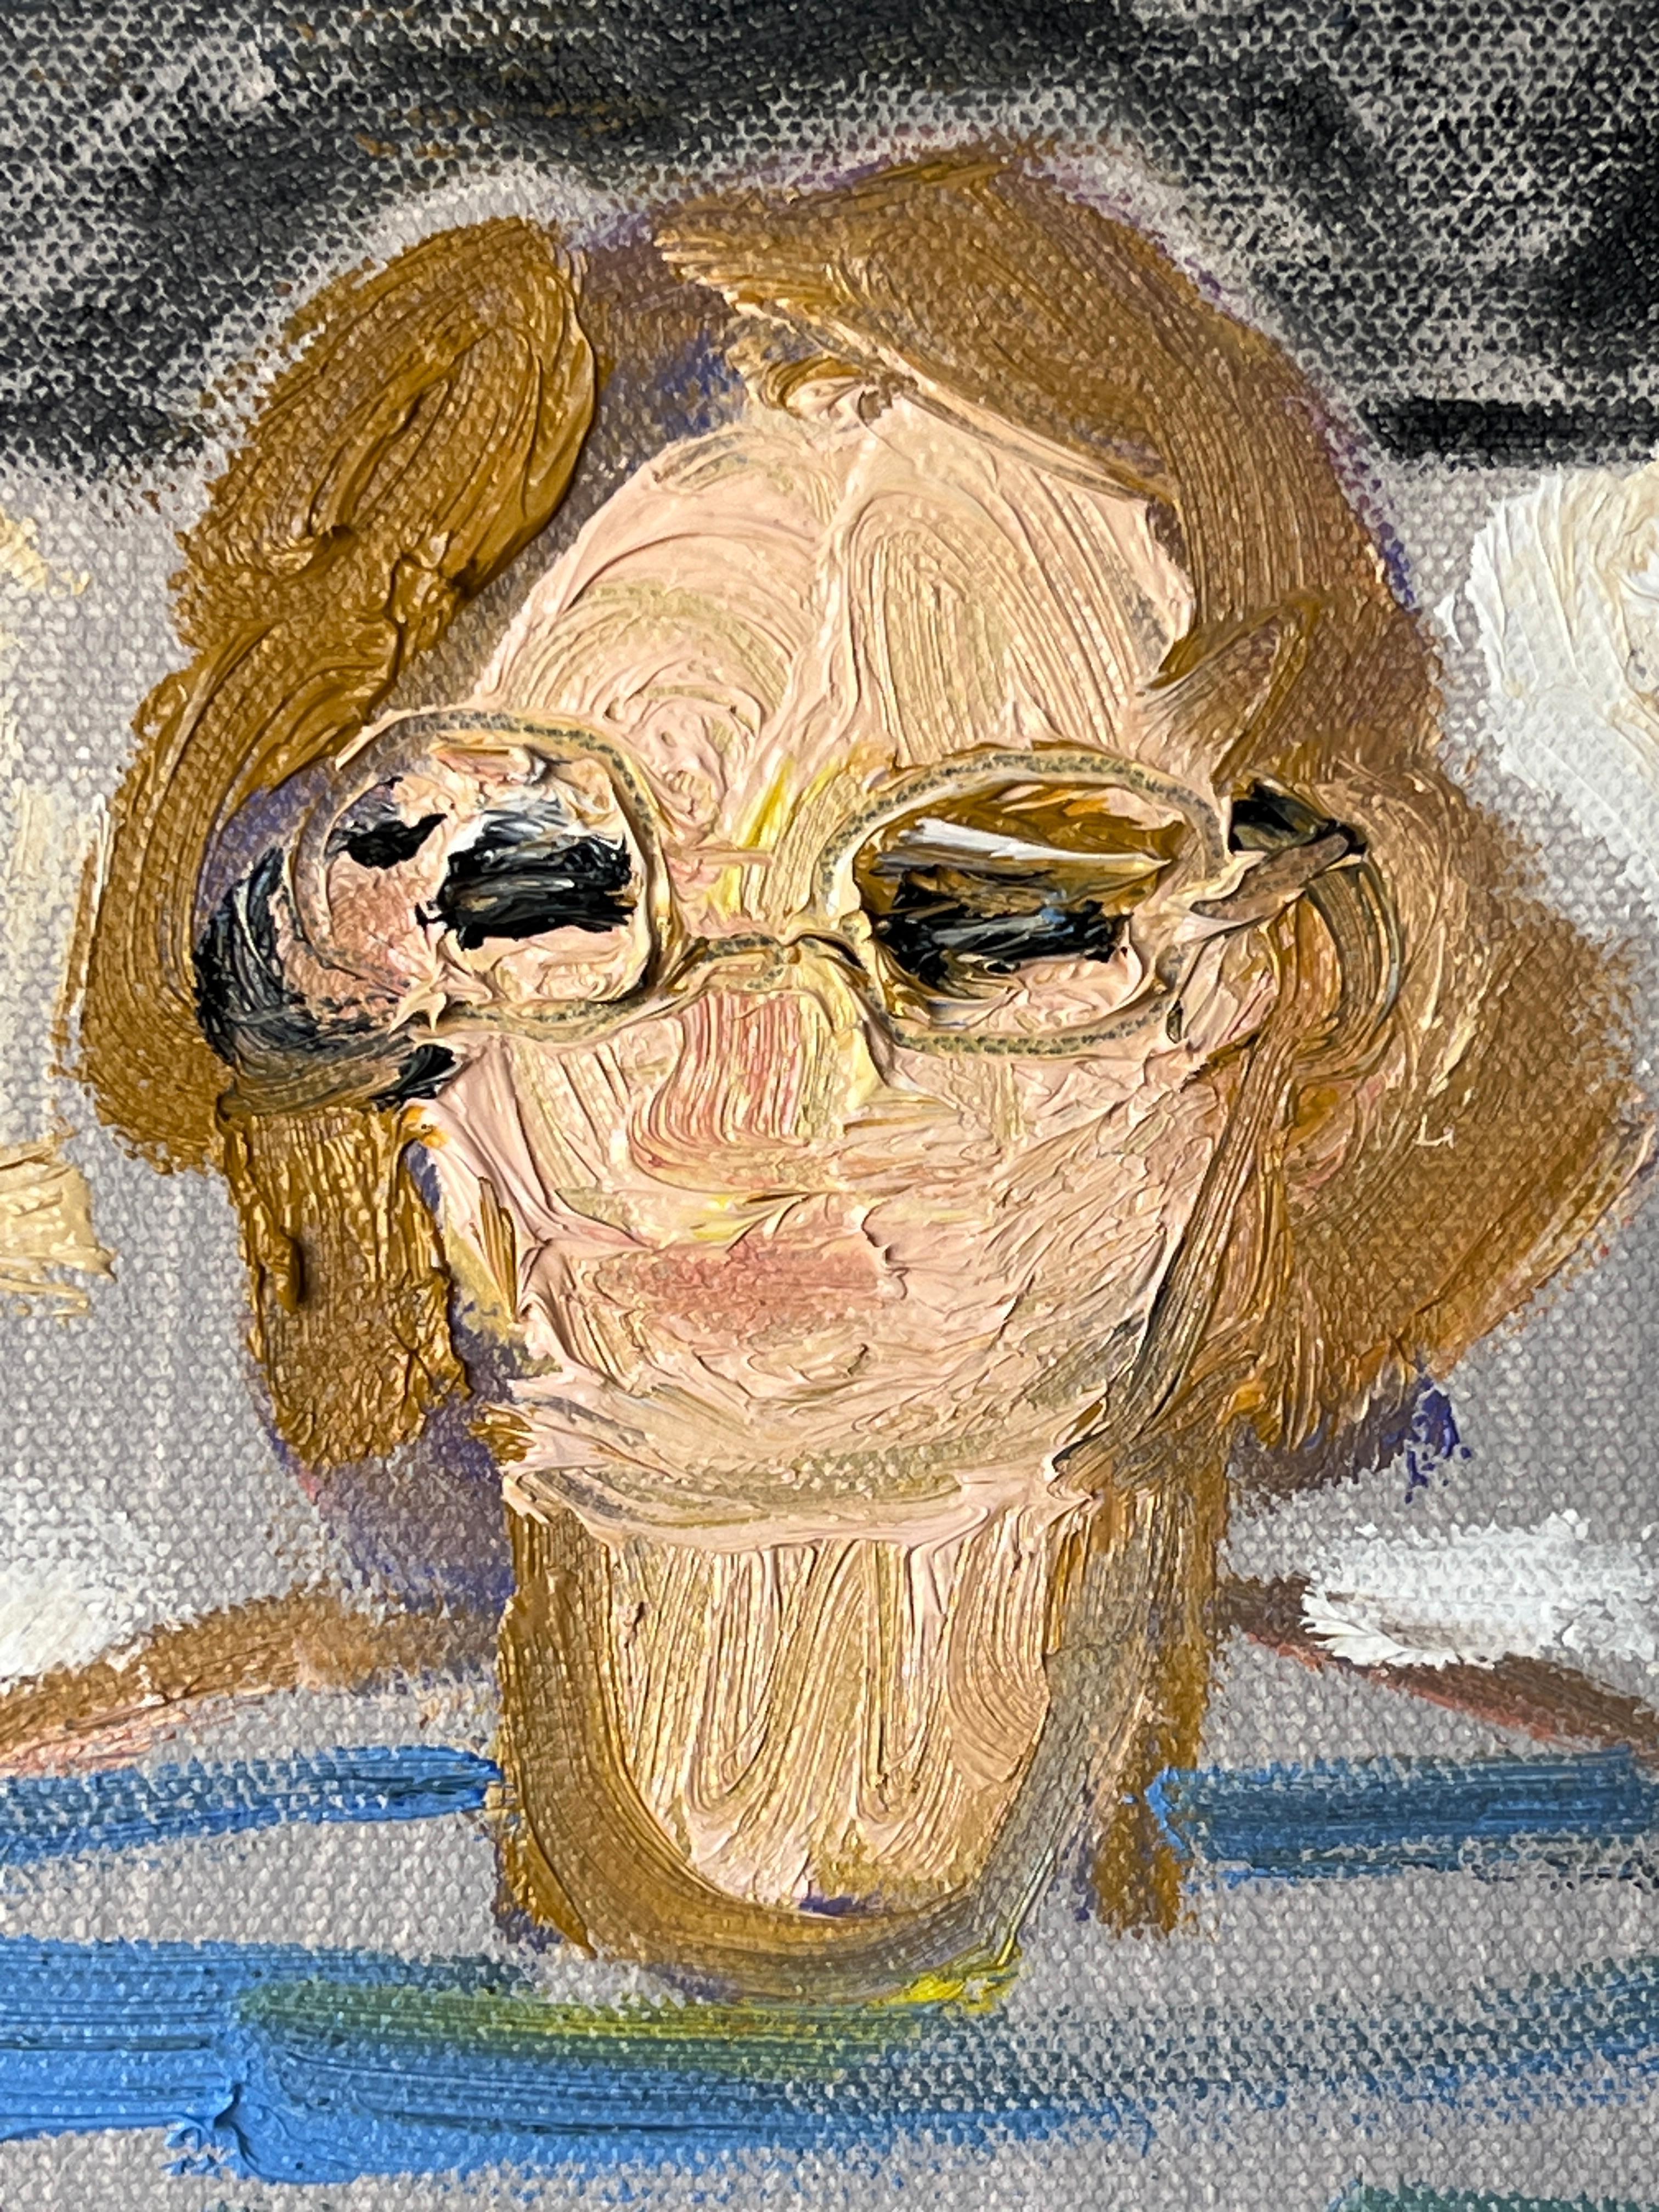 Original Cat Painting by Joshua Tree based Artist, Anne-Louise Ewen. A portrait of a person wearing glasses and a blue striped shirt in a cafe with a checkerboard floor -- with their feline companion created with thick impasto strokes. A small